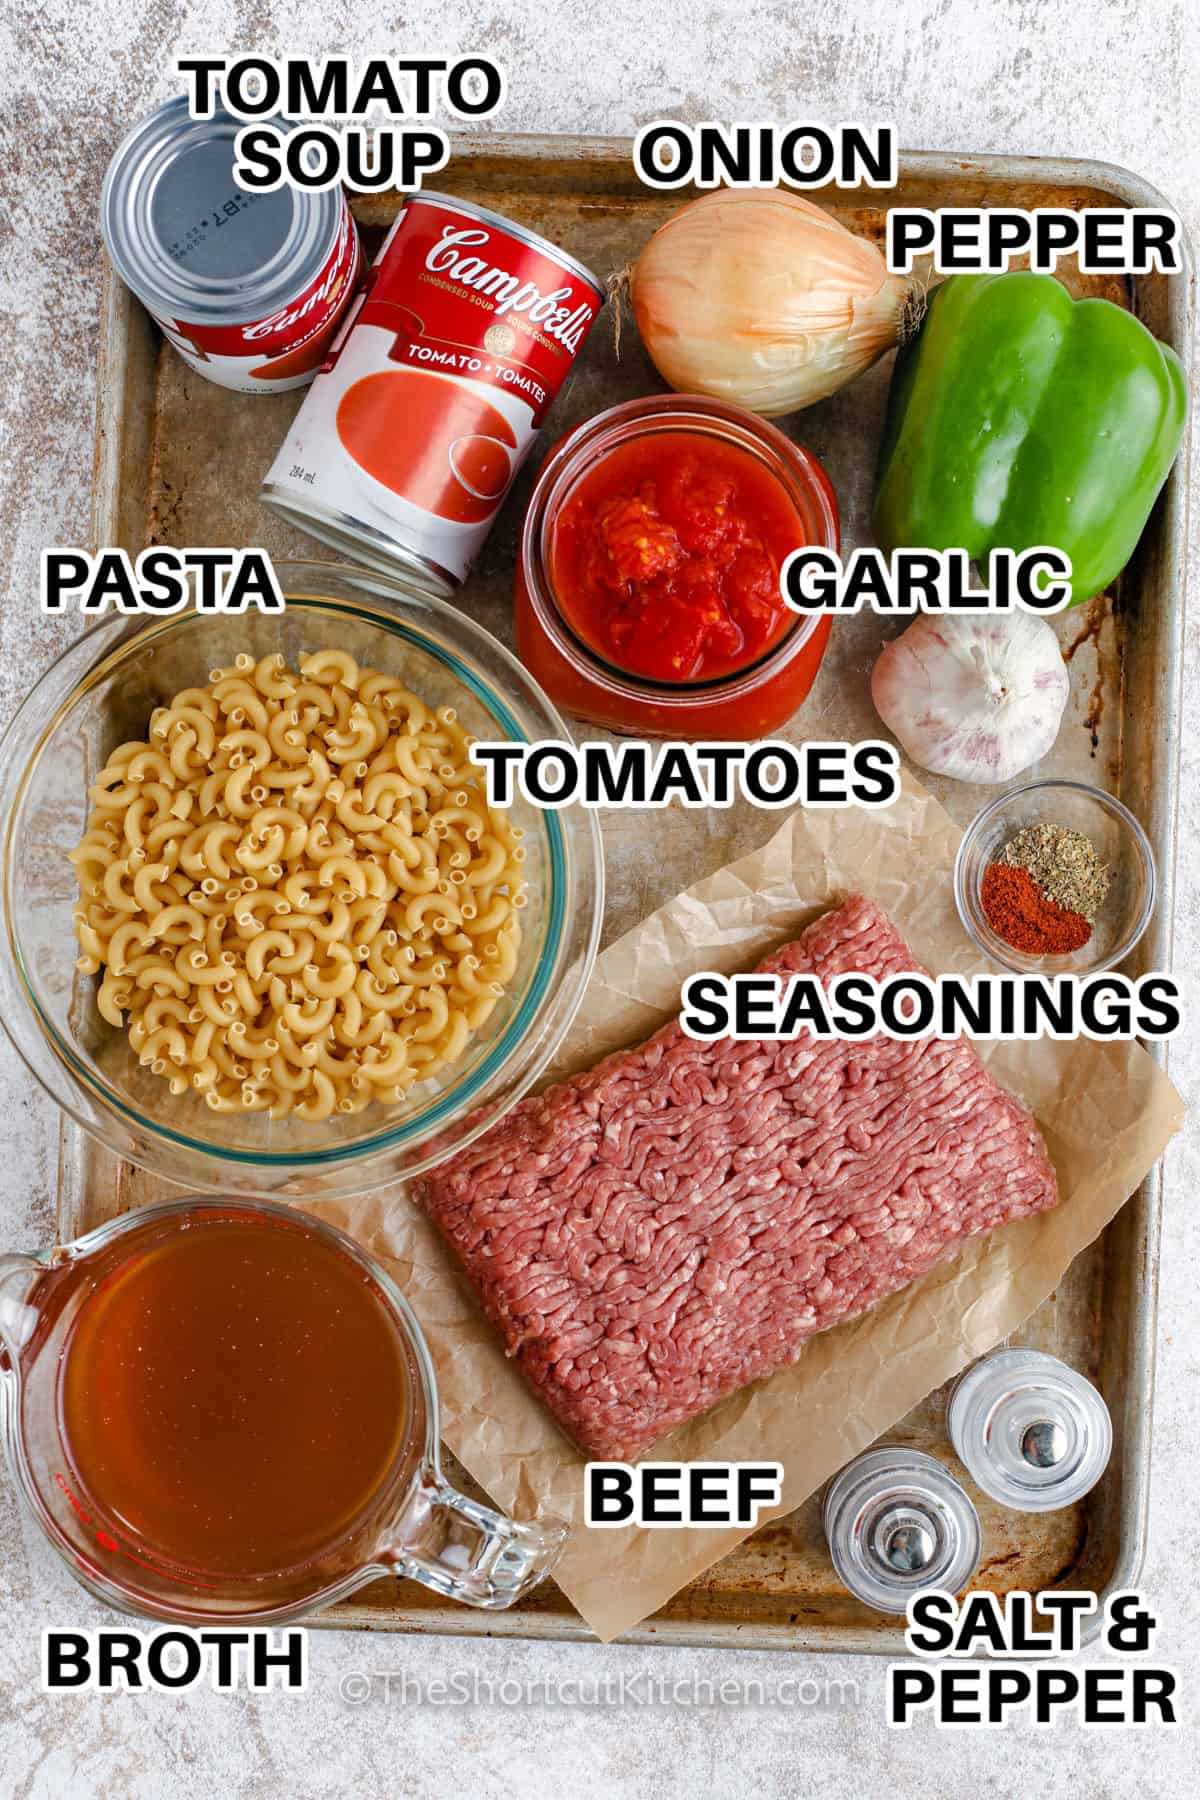 tomato soup , onion , pepper , garlic , tomatoes , pasta , purple meat , broth and seasonings with labels to make Pork and Tomato Macaroni Soup  Pork and Tomato Macaroni Soup IG Beef and Tomato Macaroni Soup TheShortcutKitchen 1